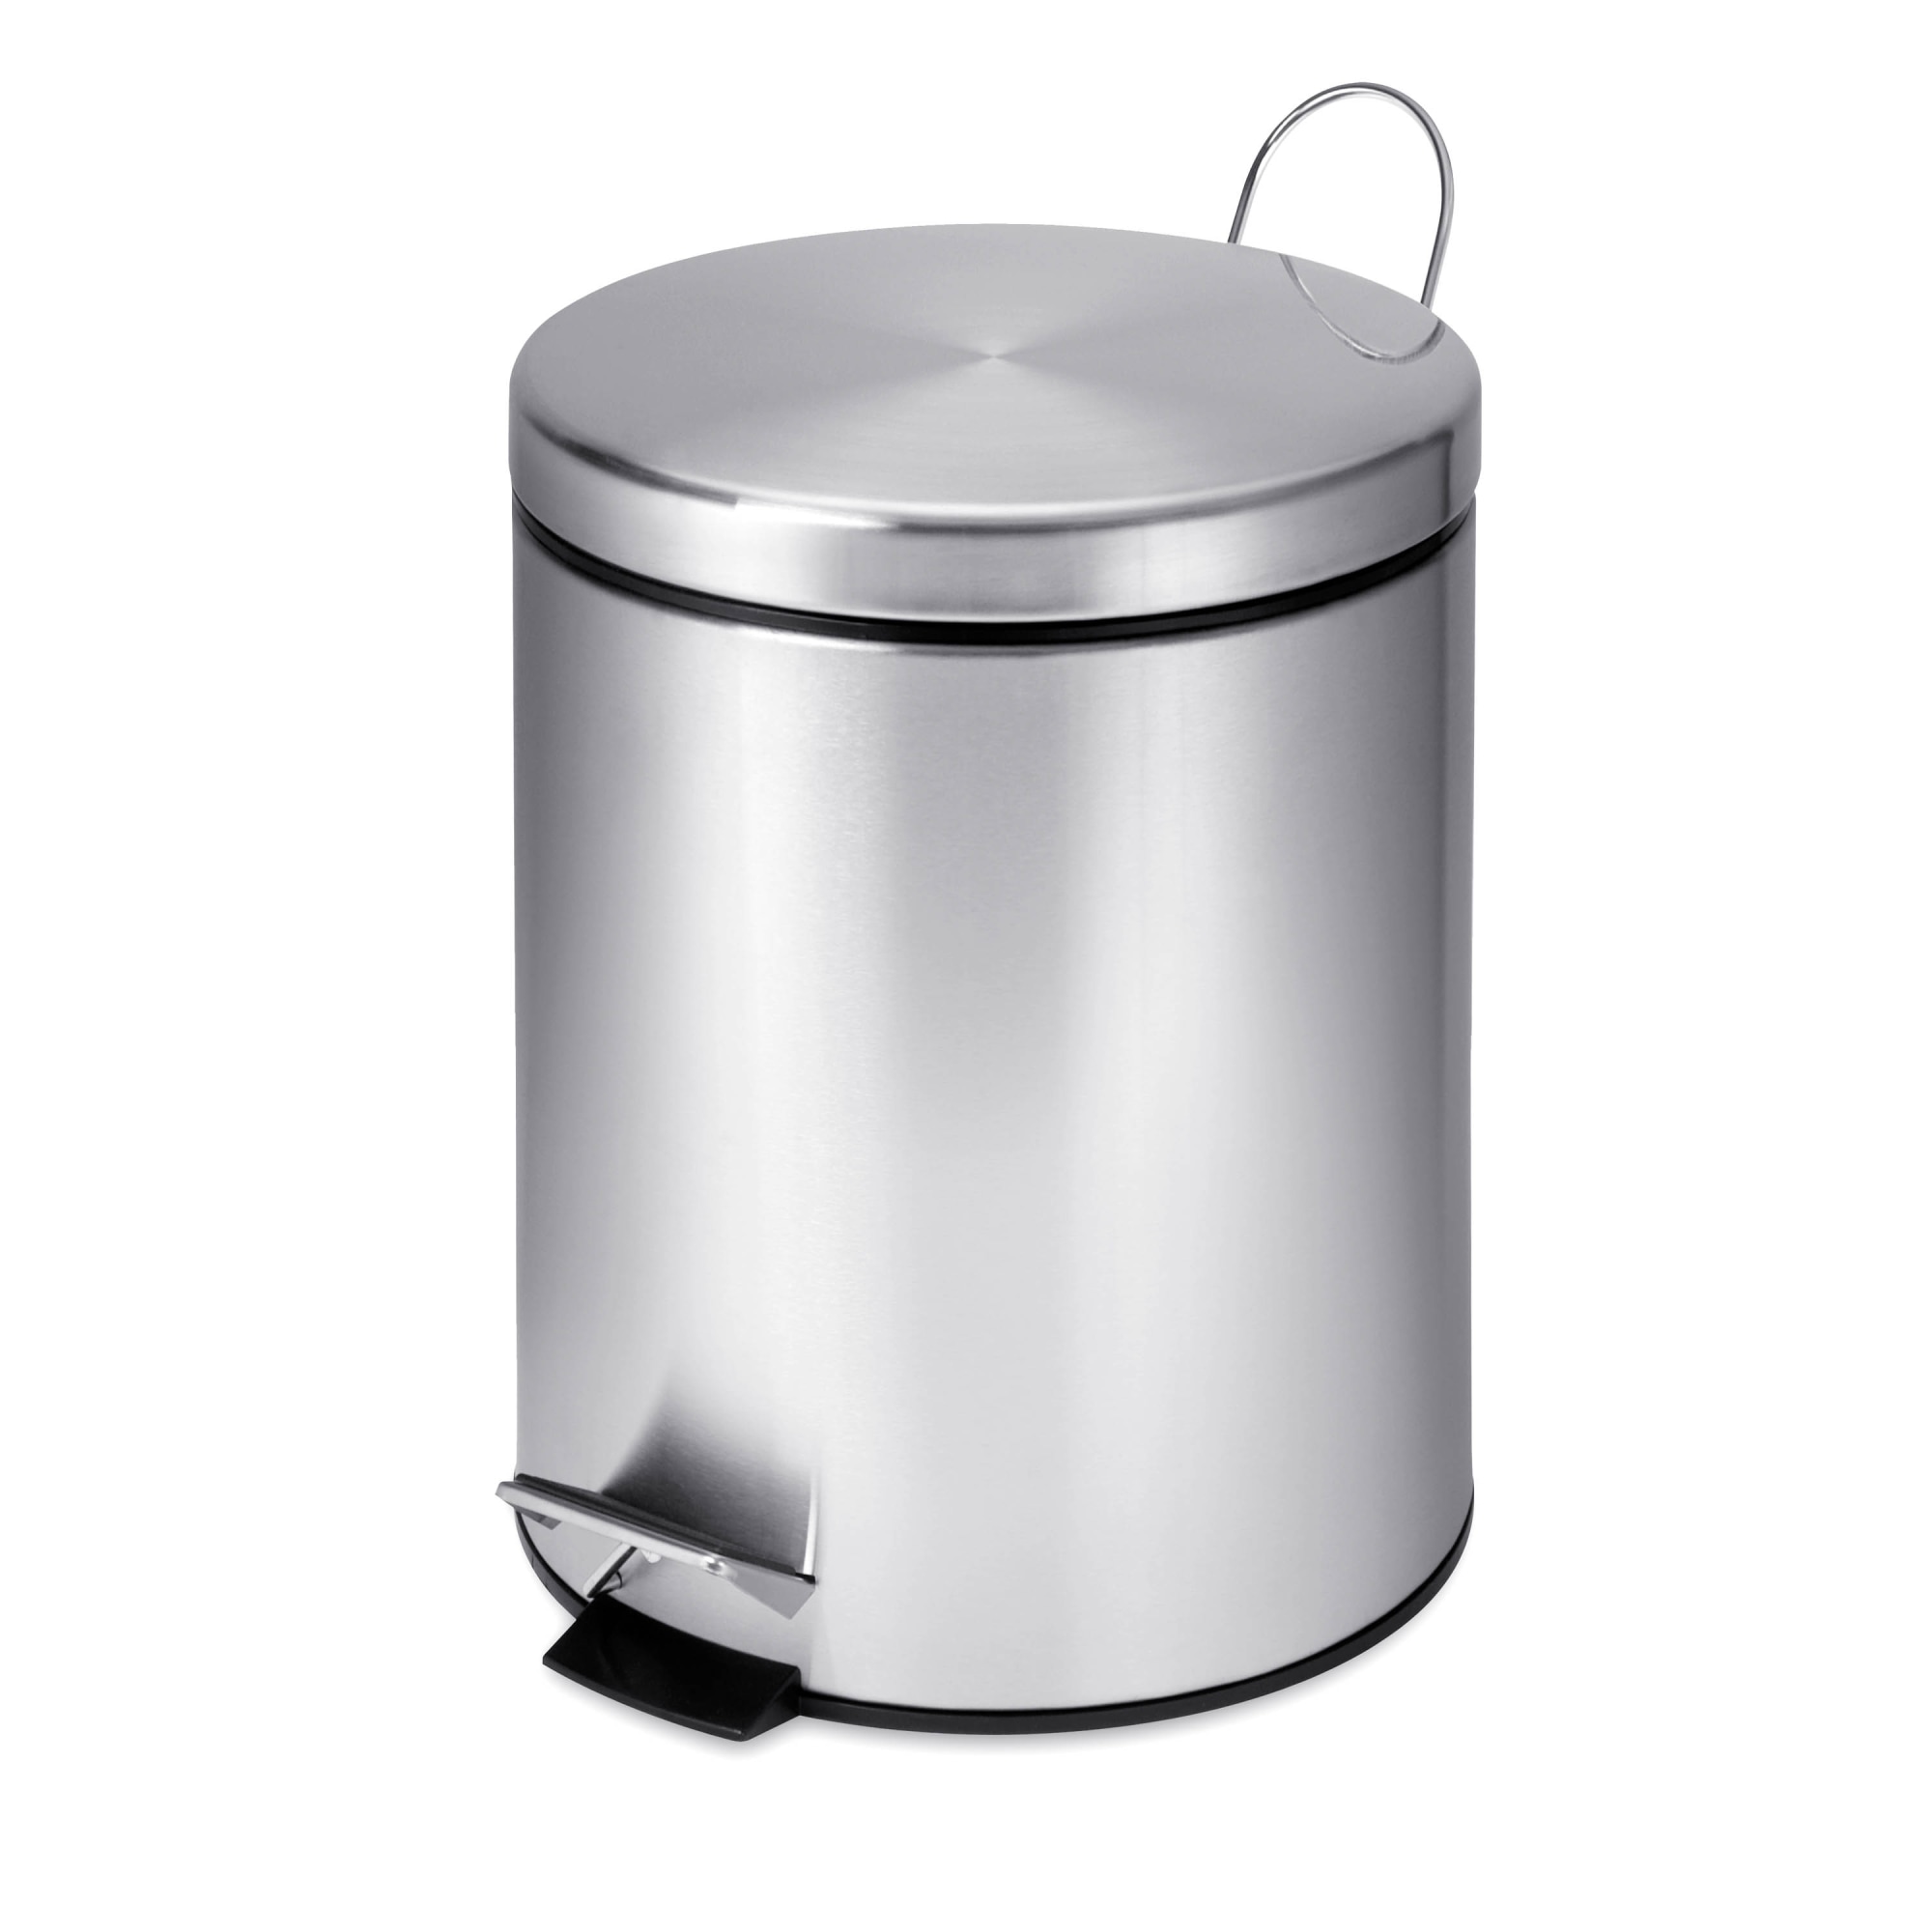 Honey-Can-Do Trs-01449 5 Liter Round Stainless Steel Step Trash Can - Stainless Steel - image 1 of 7